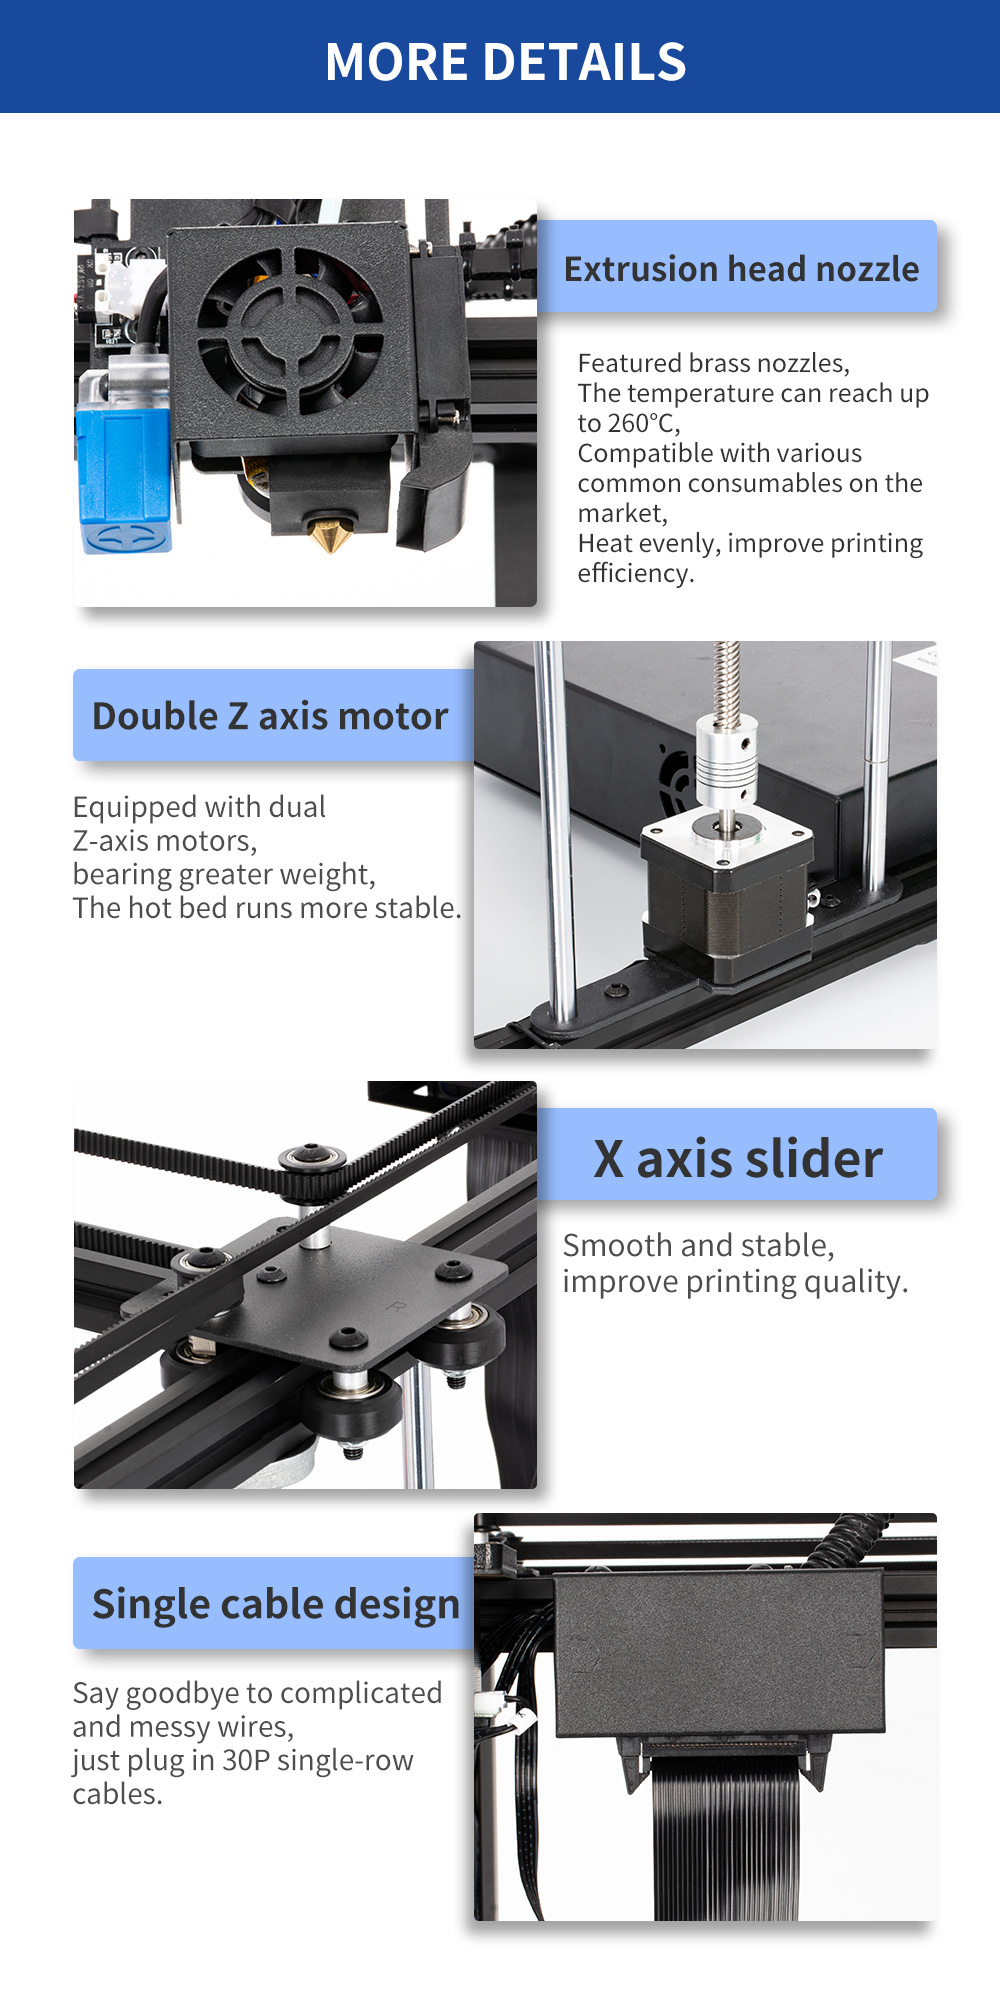 Tronxy 3D Printer X5SA-400 Power Off Resme Print Larger Printing Size 400x400x400mm 3.5 Inch Touch Screen 24V CoreXY Structure